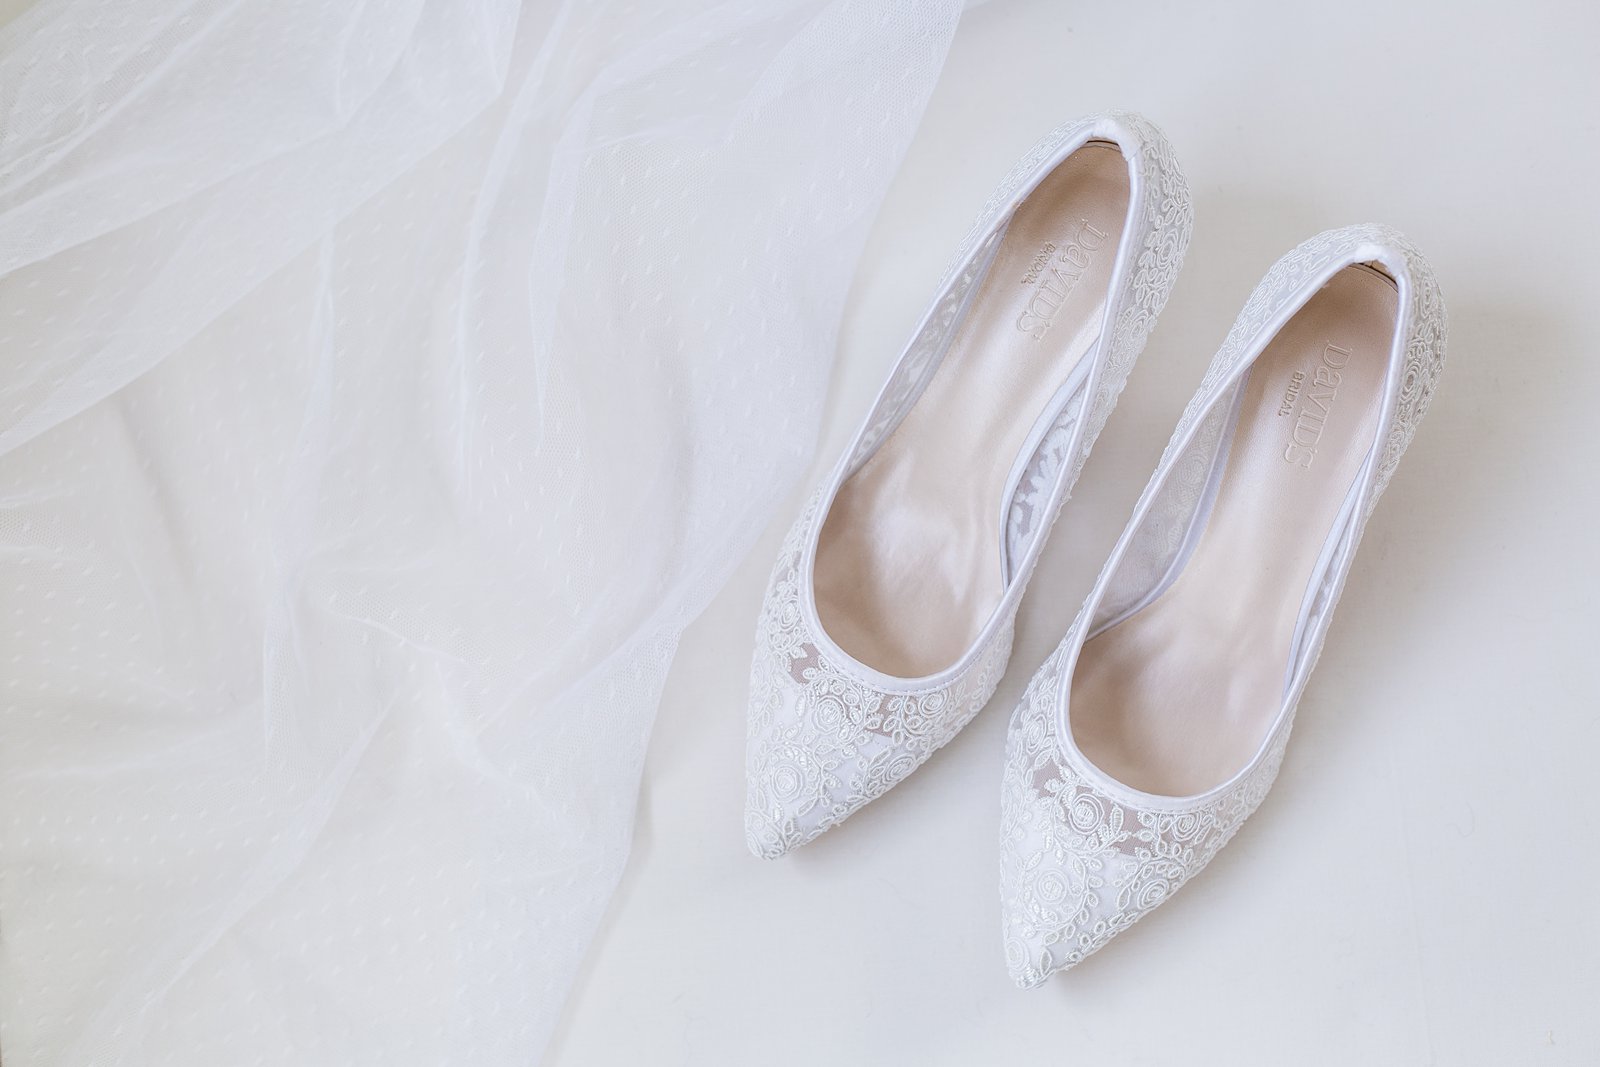 Brides's wedding day details of vintage inspired wedding shoes by PMA Photography.